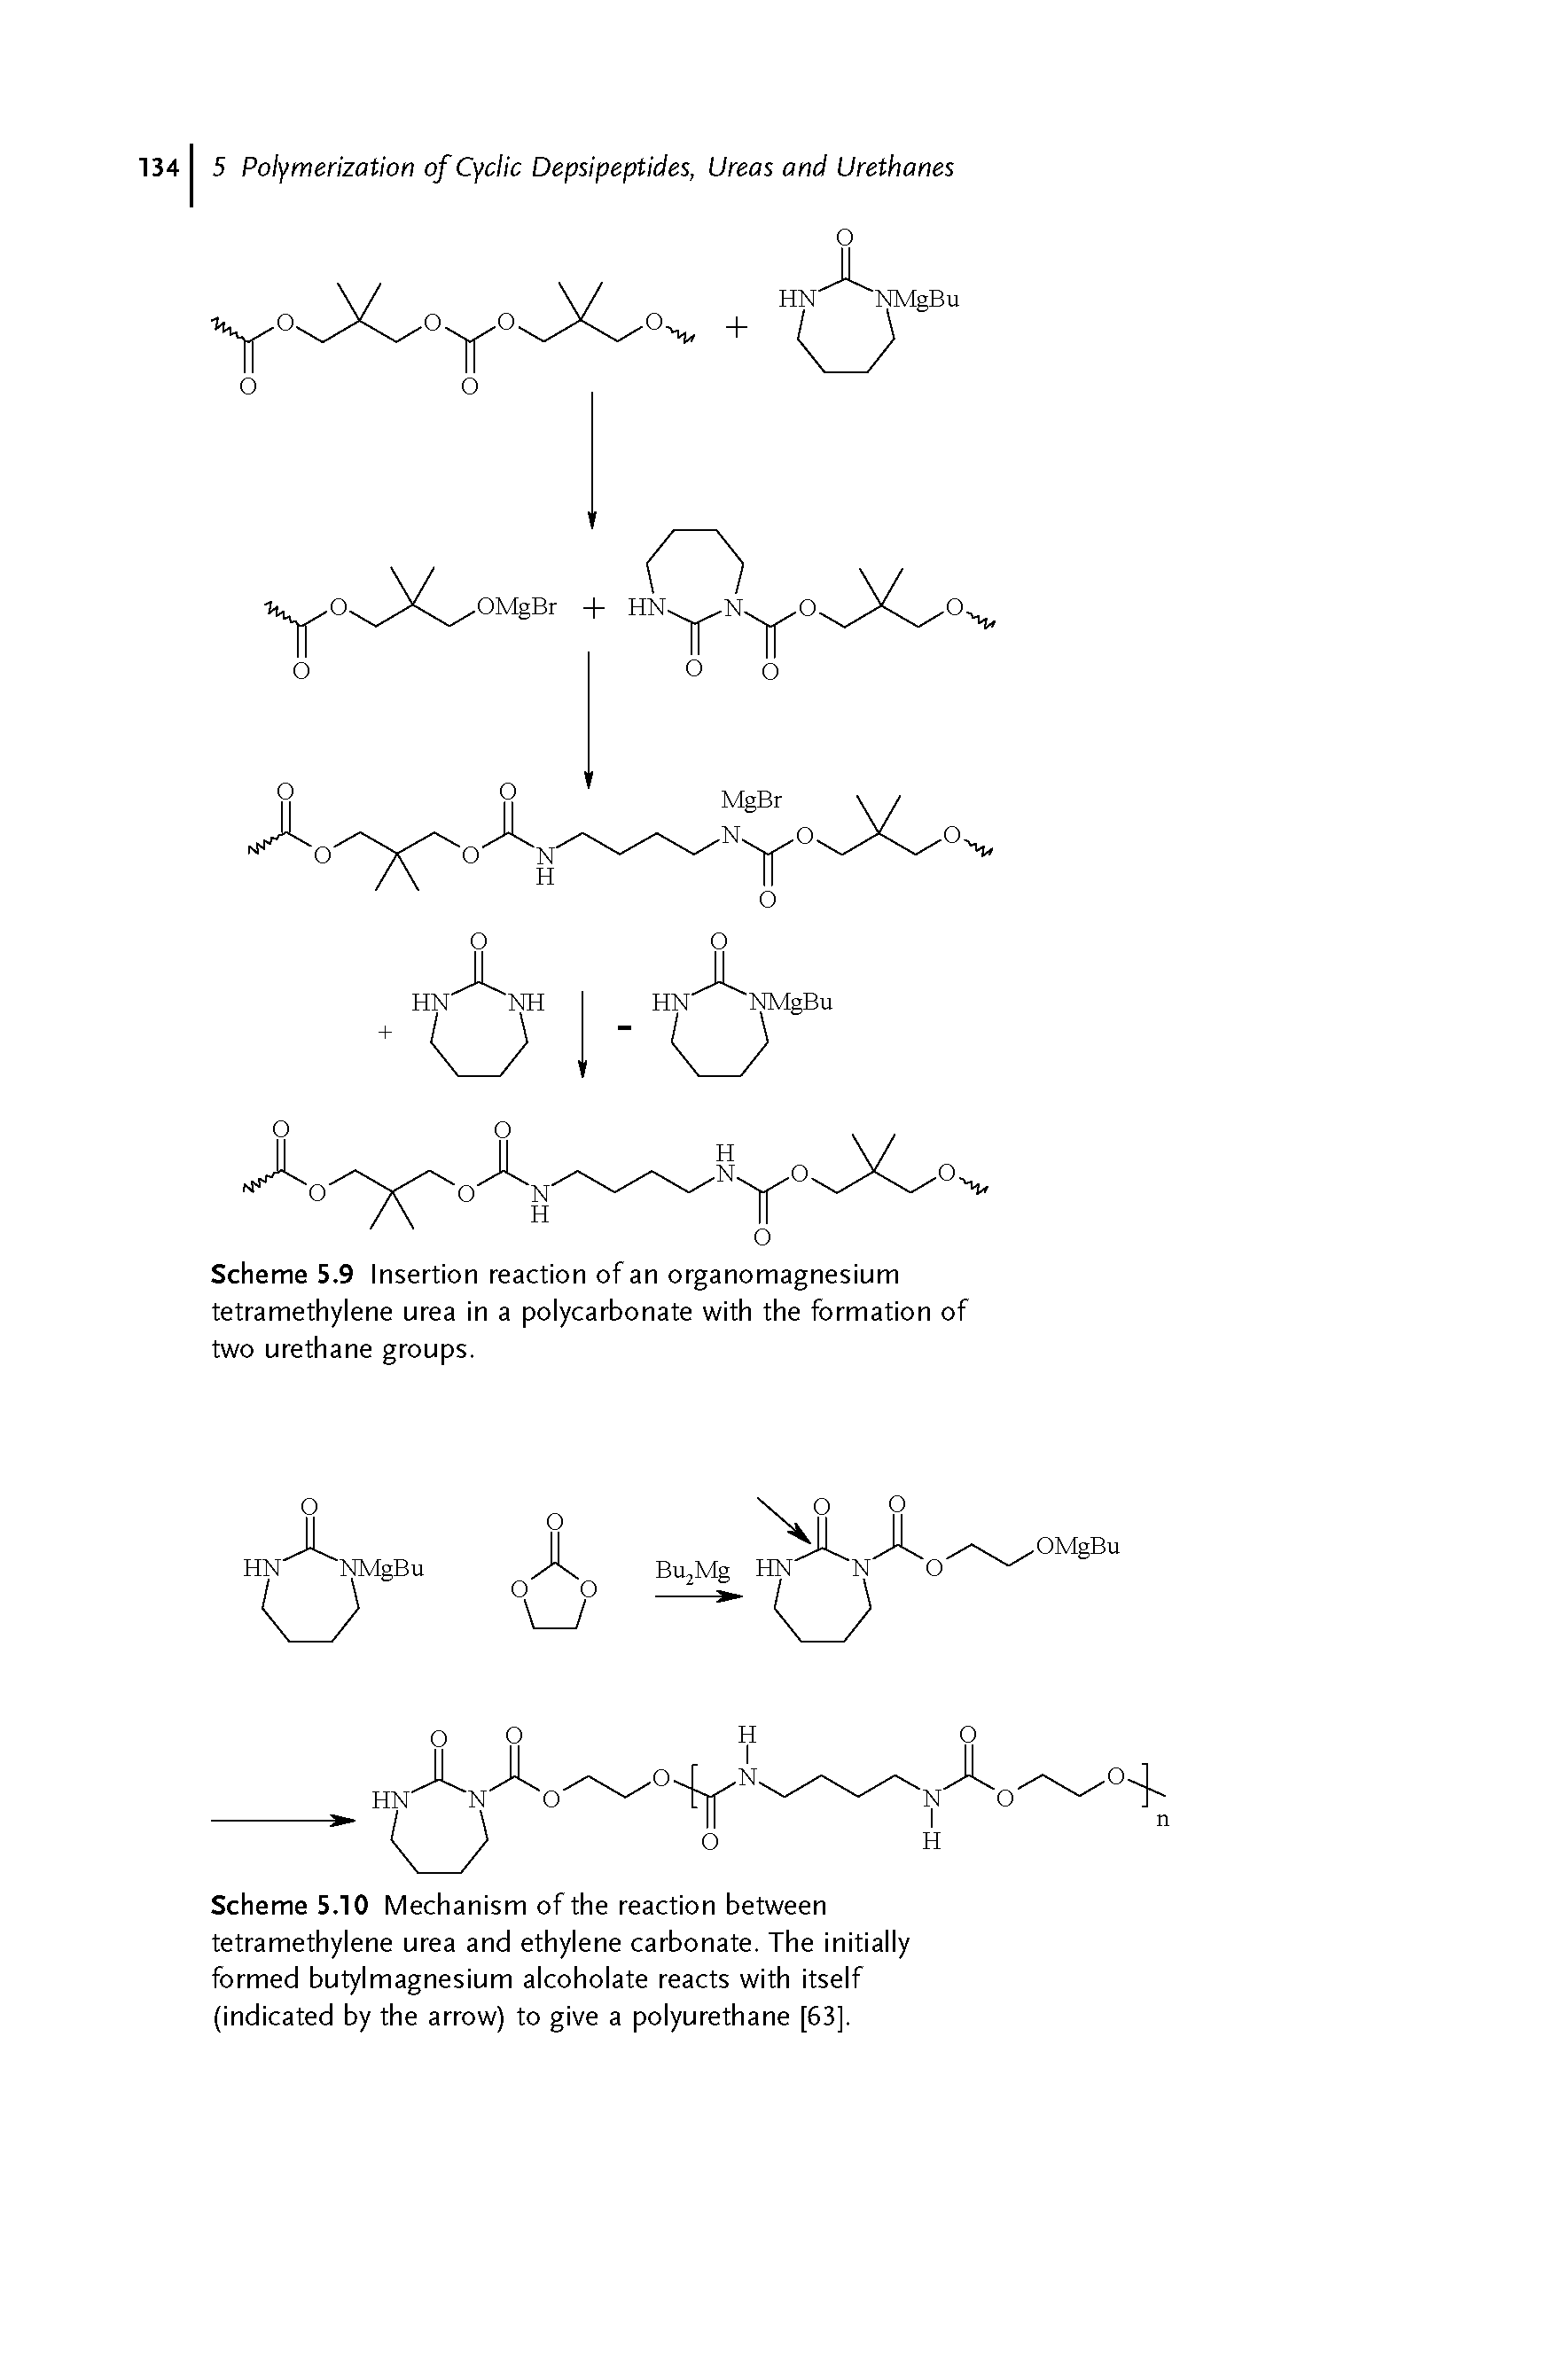 Scheme 5.9 Insertion reaction of an organomagnesium tetramethylene urea in a polycarbonate with the formation of two urethane groups.